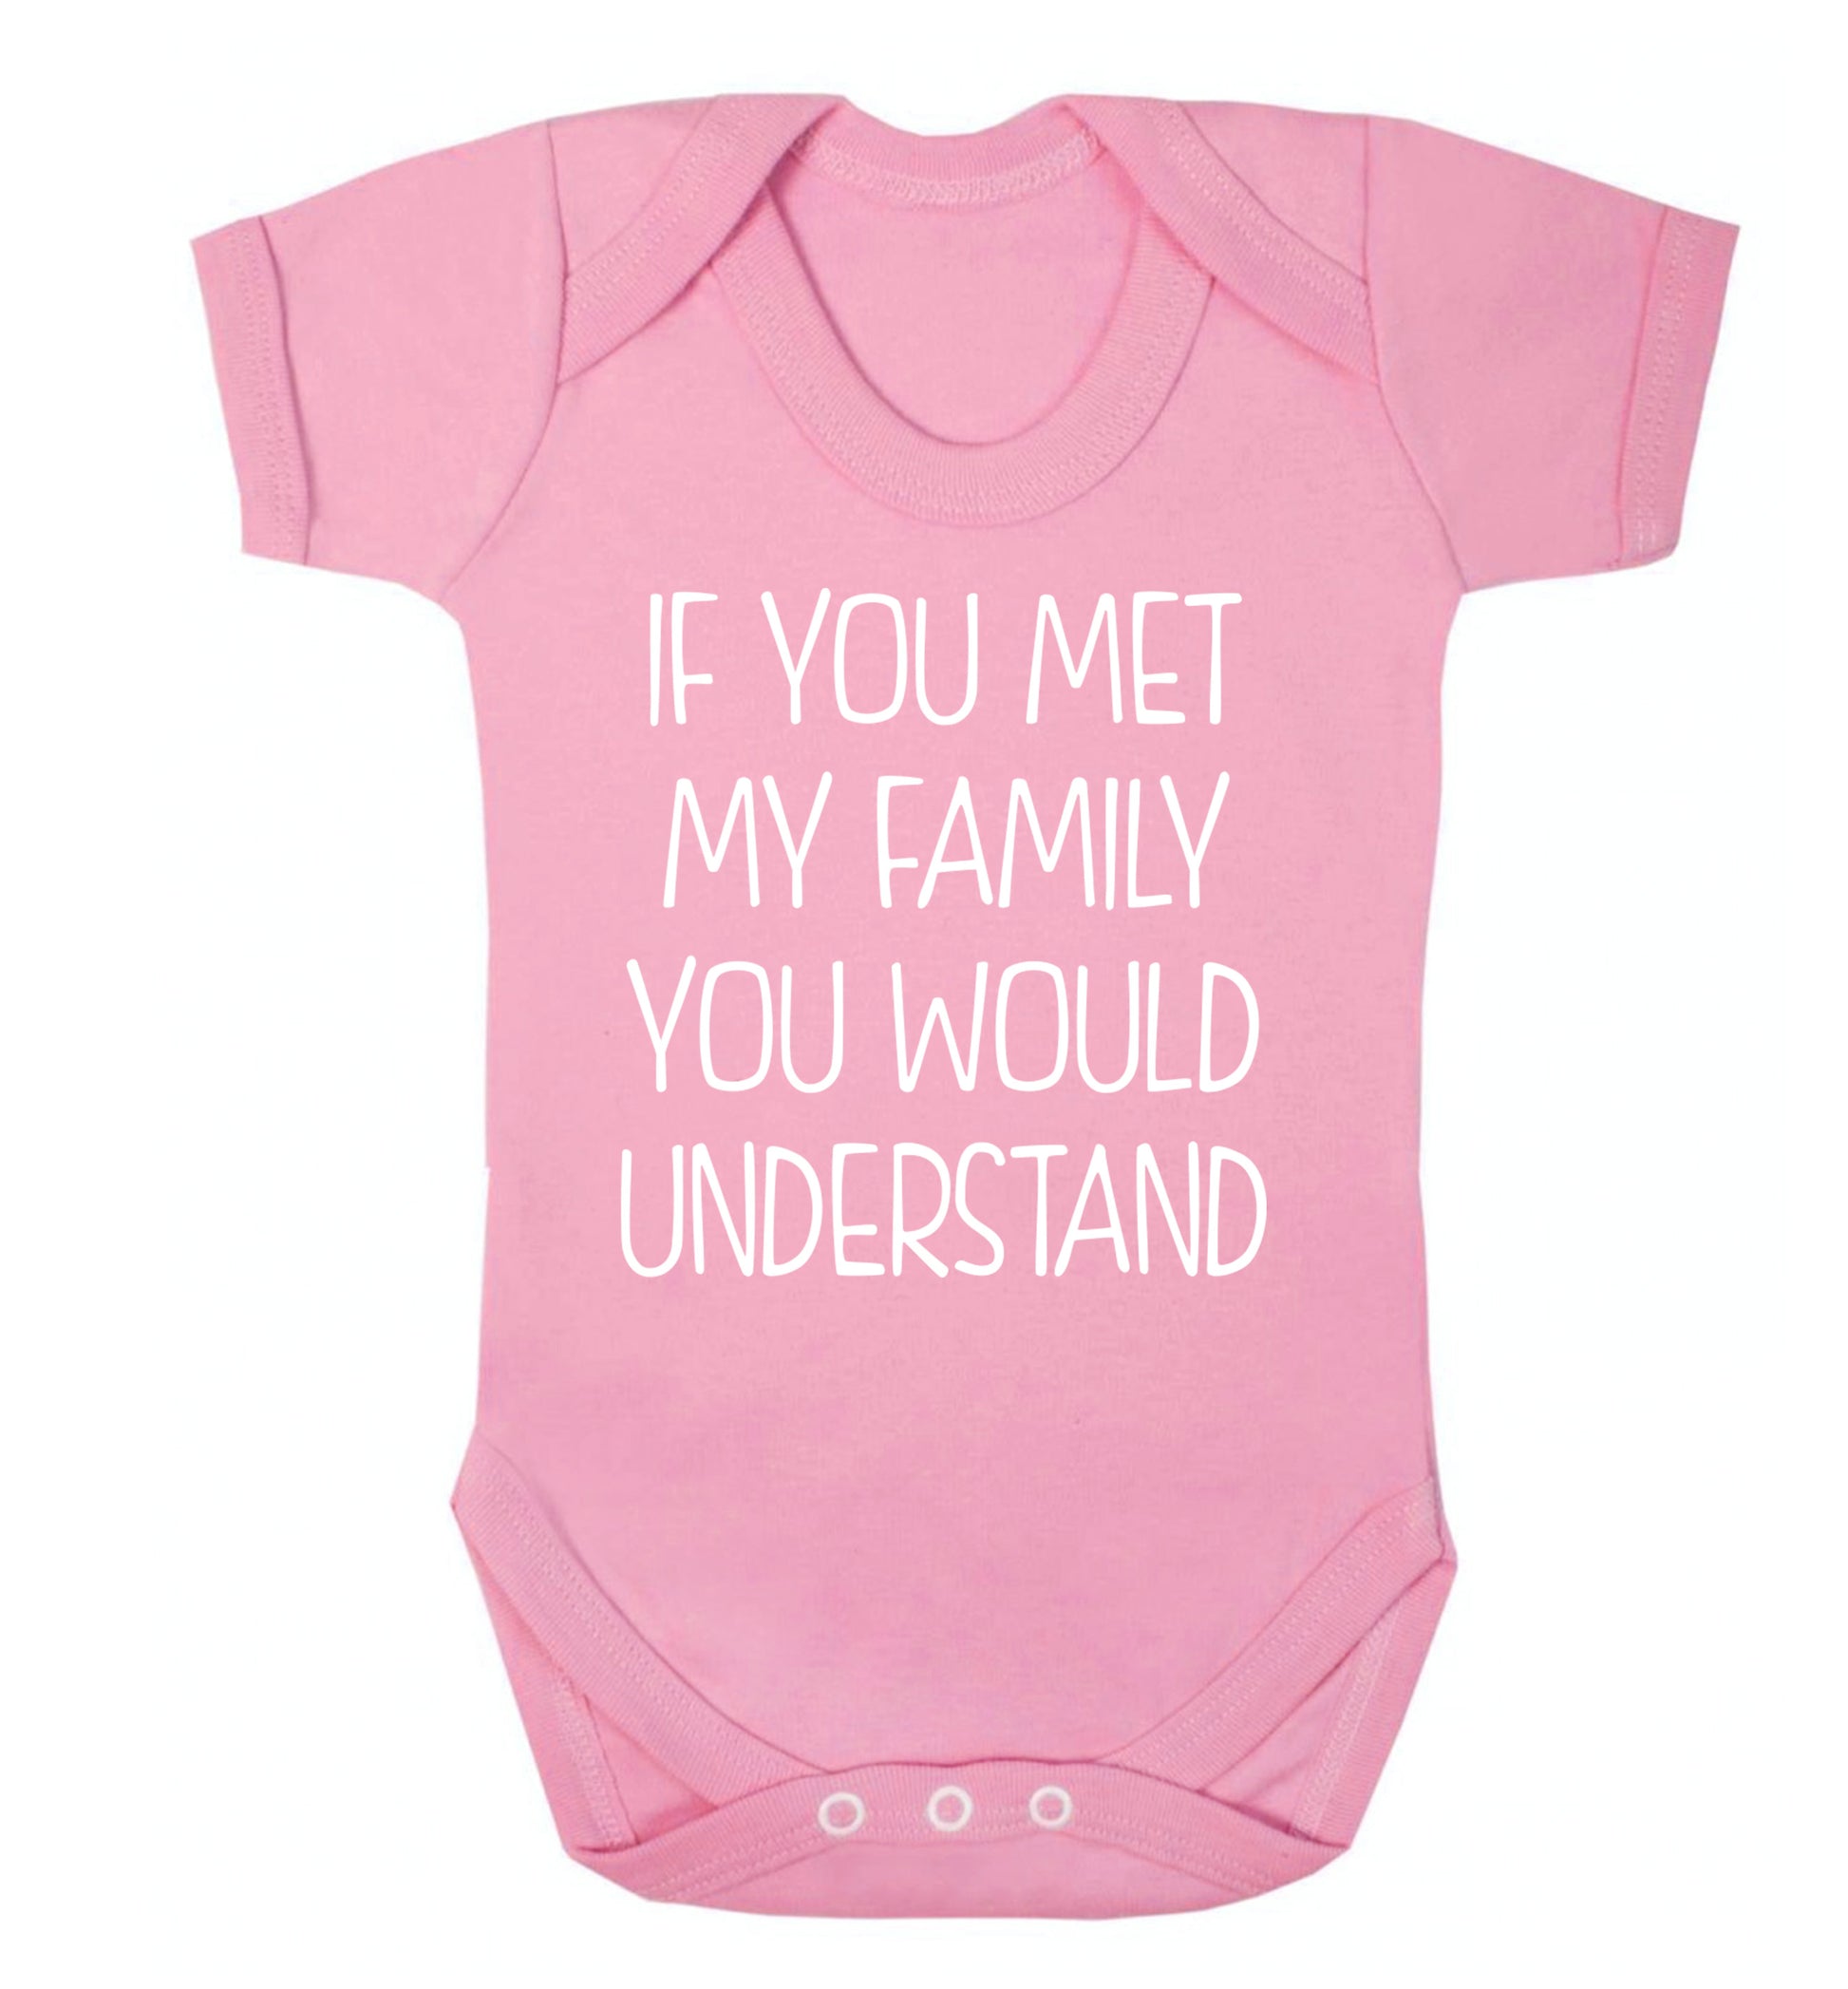 If you met my family you would understand Baby Vest pale pink 18-24 months